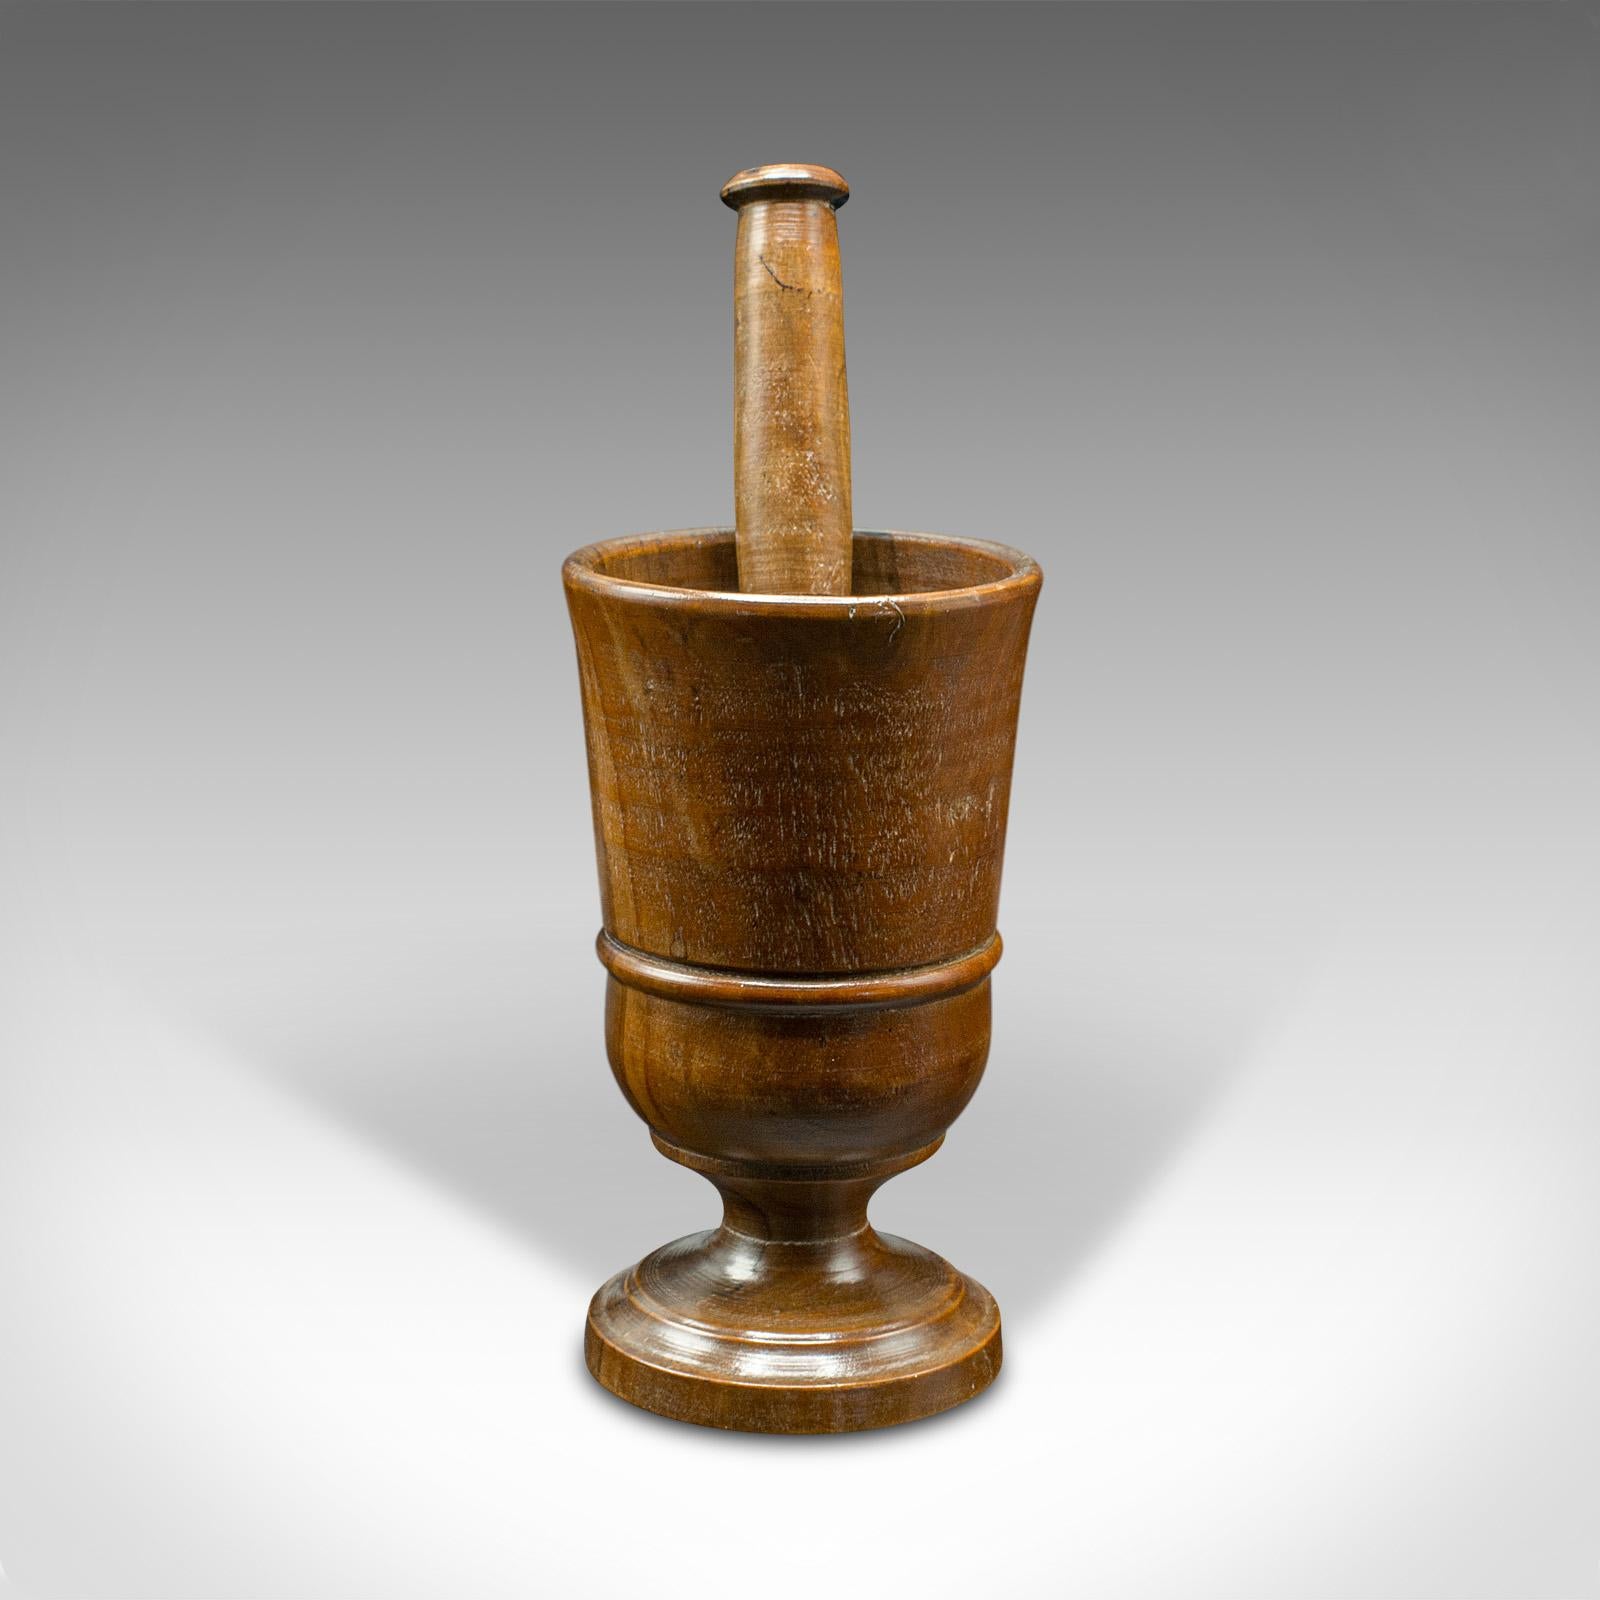 This is an antique turned mortar and pestle. An English yew decorative treen, dating to the late Victorian period, circa 1900.

A darling kitchen or apothecary mortar and pestle
Displays a desirable aged patina and in good order
Yew stocks show